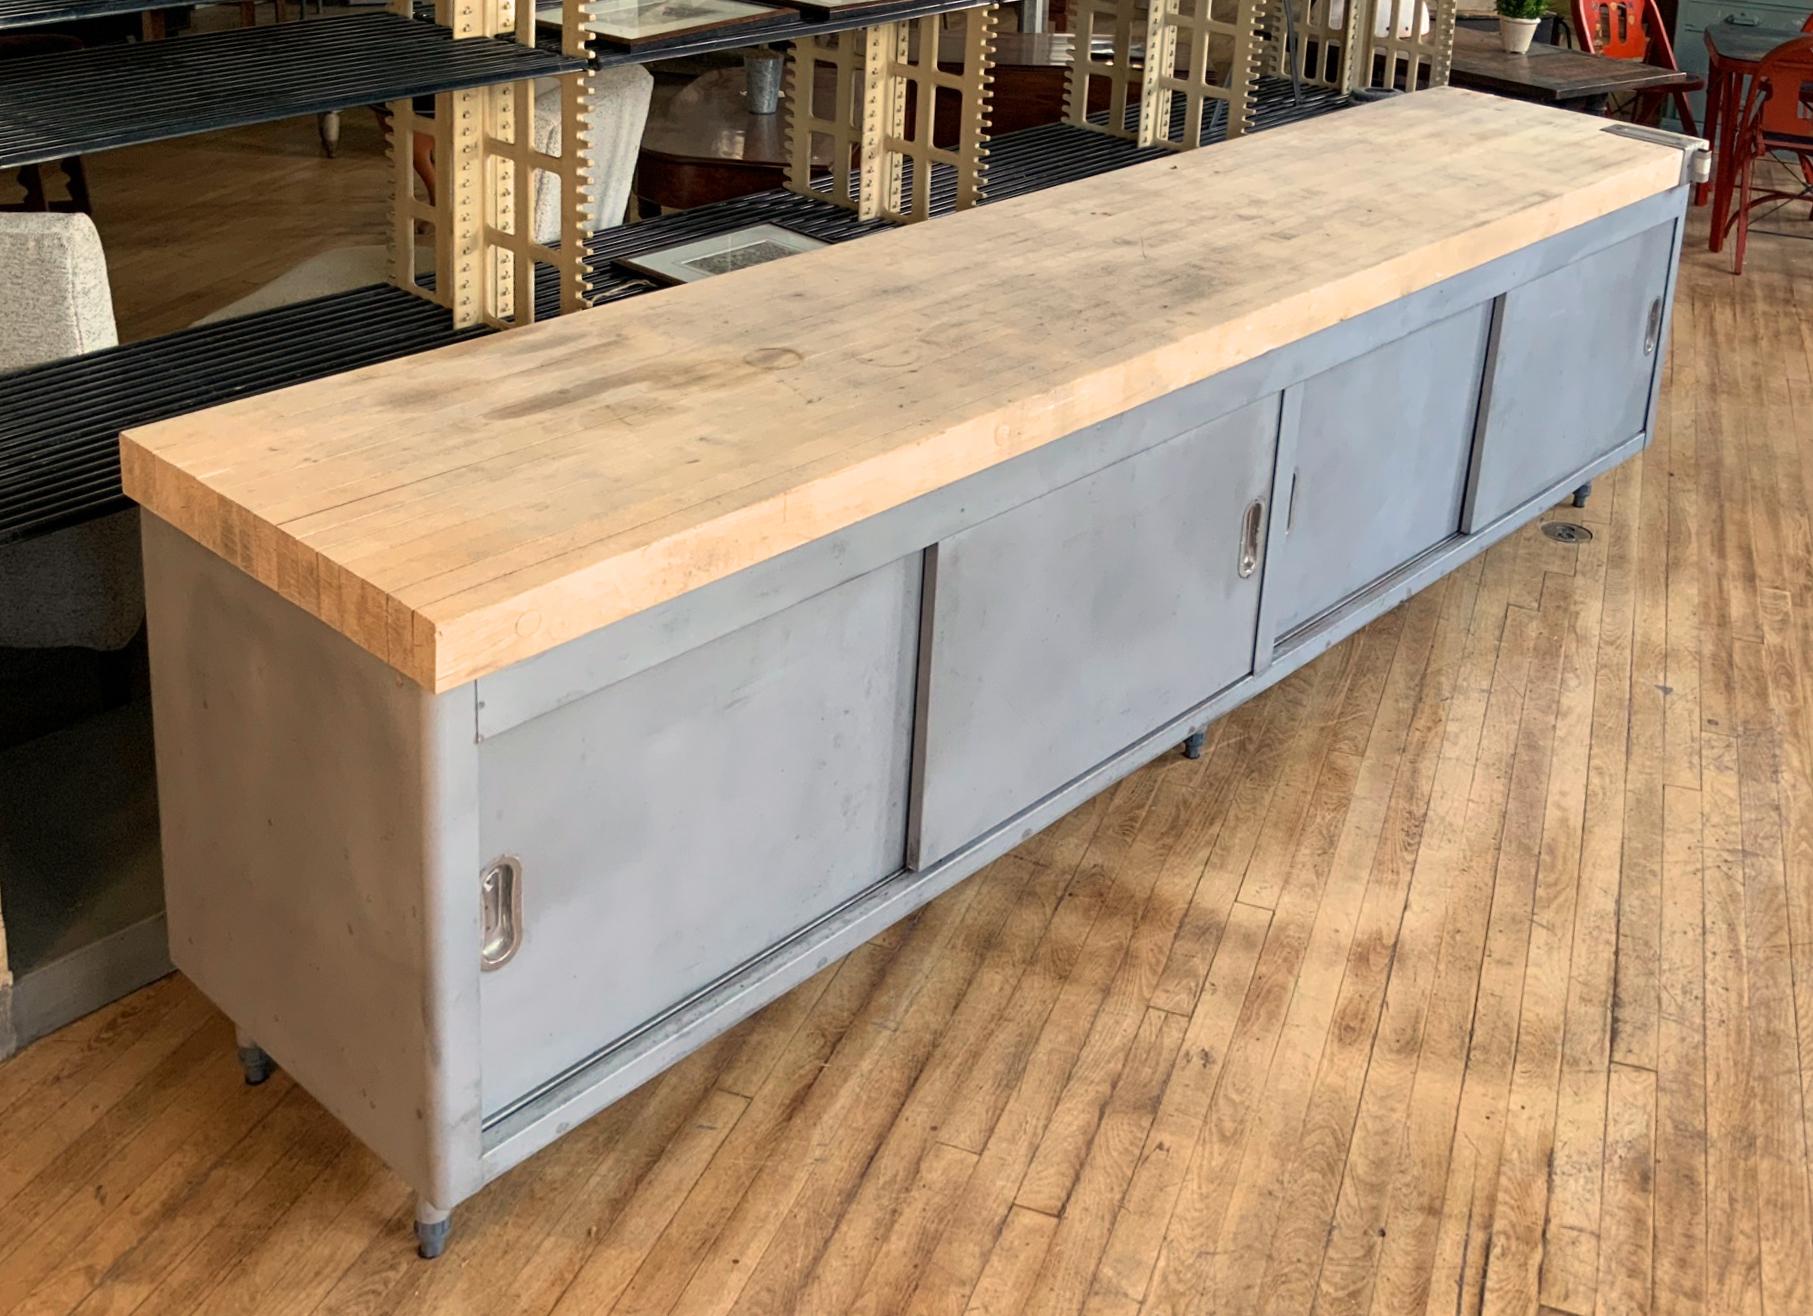 A very nice and well made galvanized steel cabinet with a very thick butcherblock top. The cabinet having full storage behind two pairs of sliding doors, each side with a full width shelf. And the whole raised on steel legs.